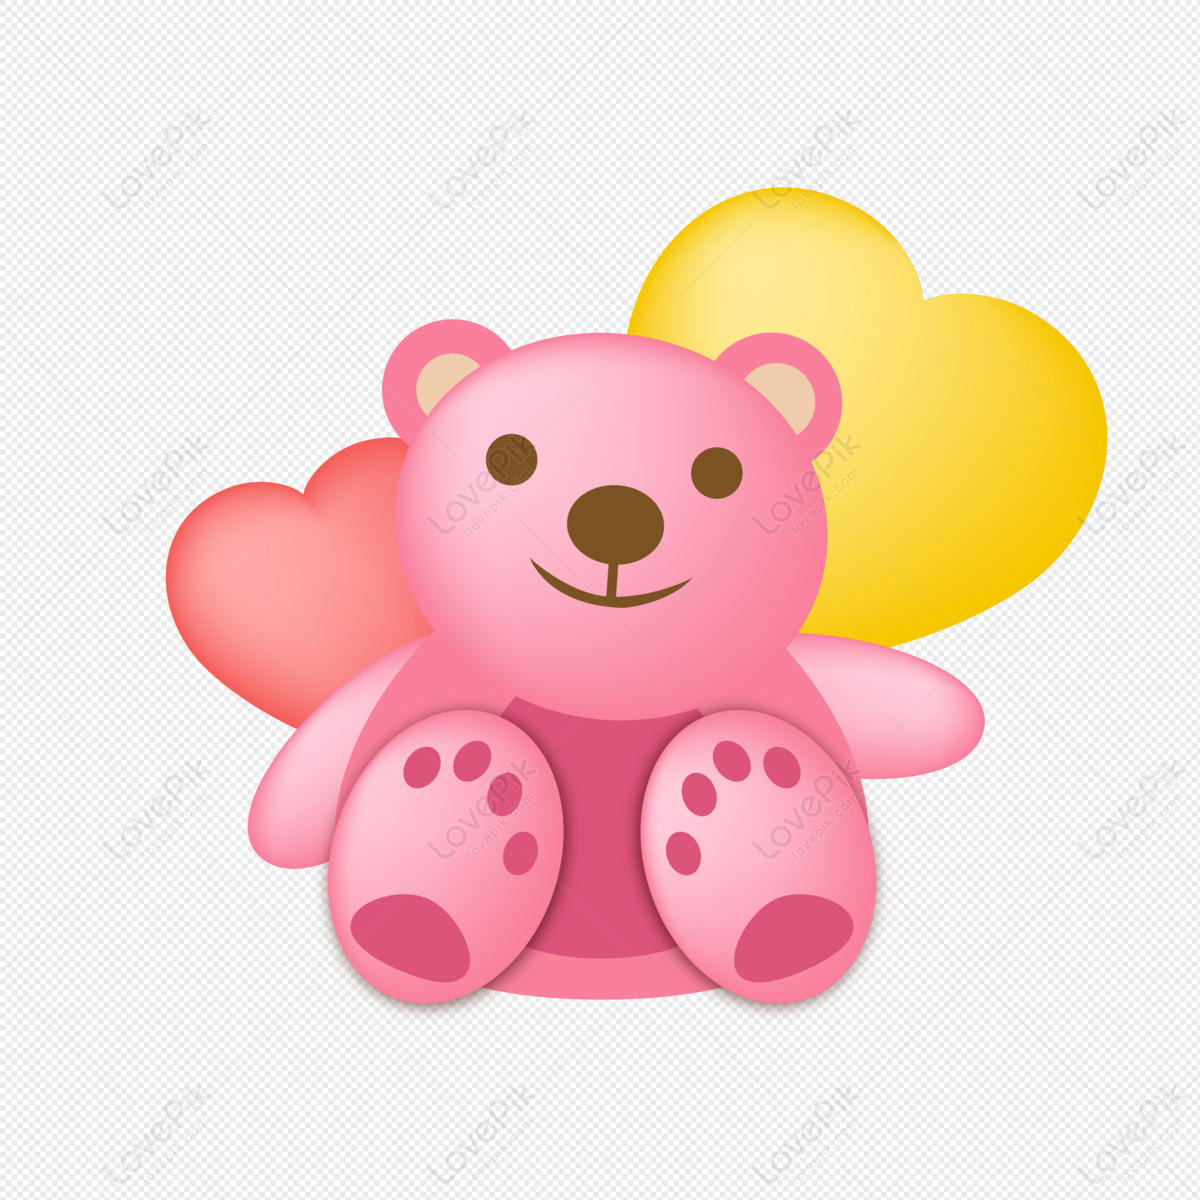 61 Childrens Day Teddy Bears And Balloons PNG Free Download And ...